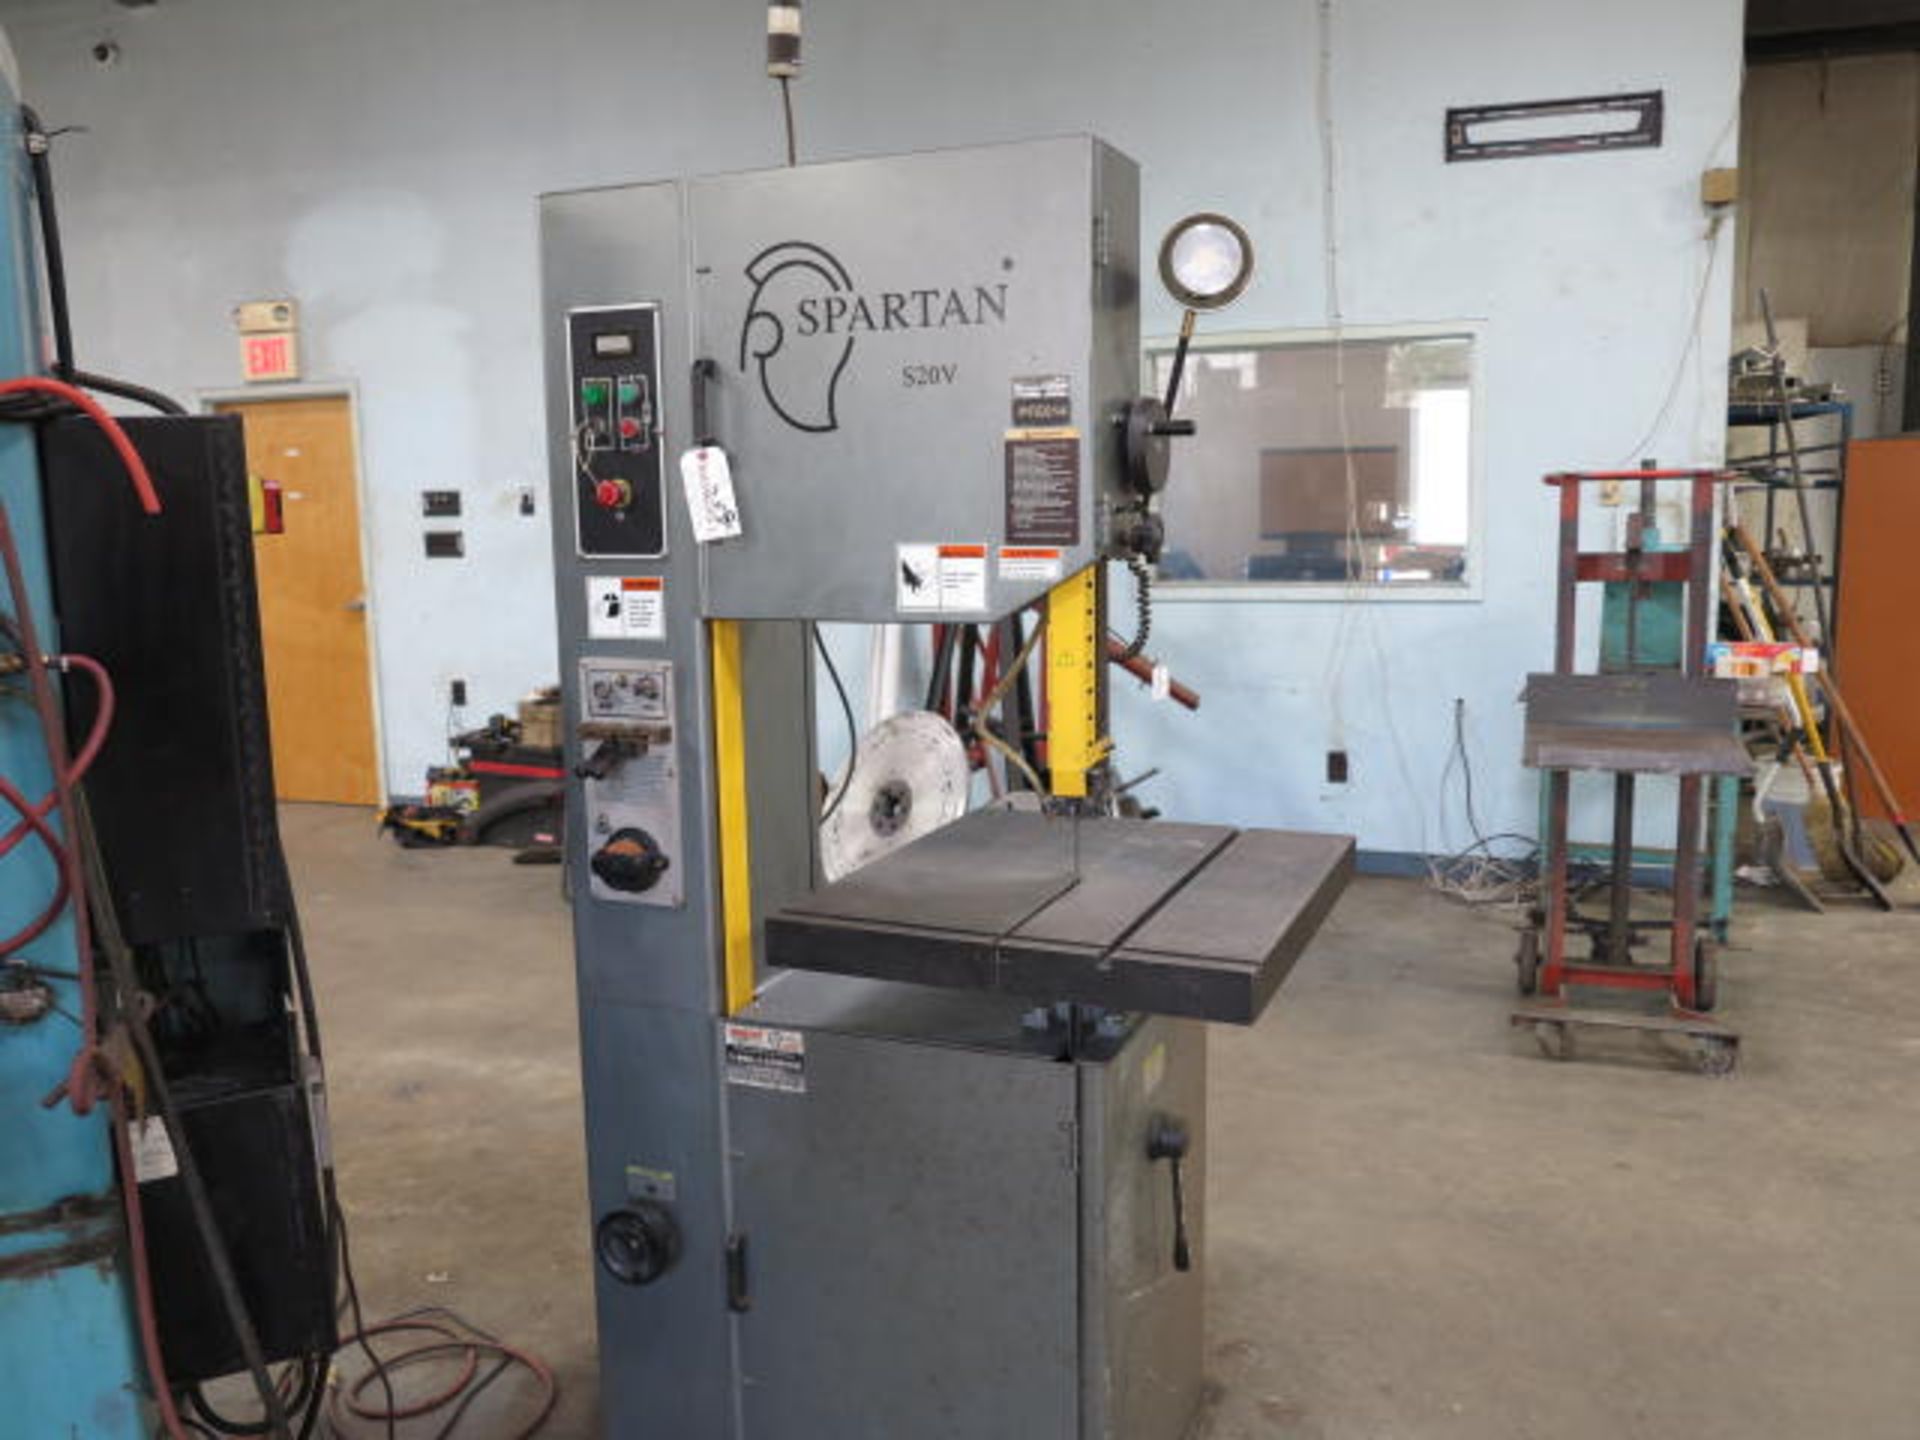 Spartan Model S20V Vertical Band Saw S/N S20D-140 with Welding Unit Location: Plainfield CT